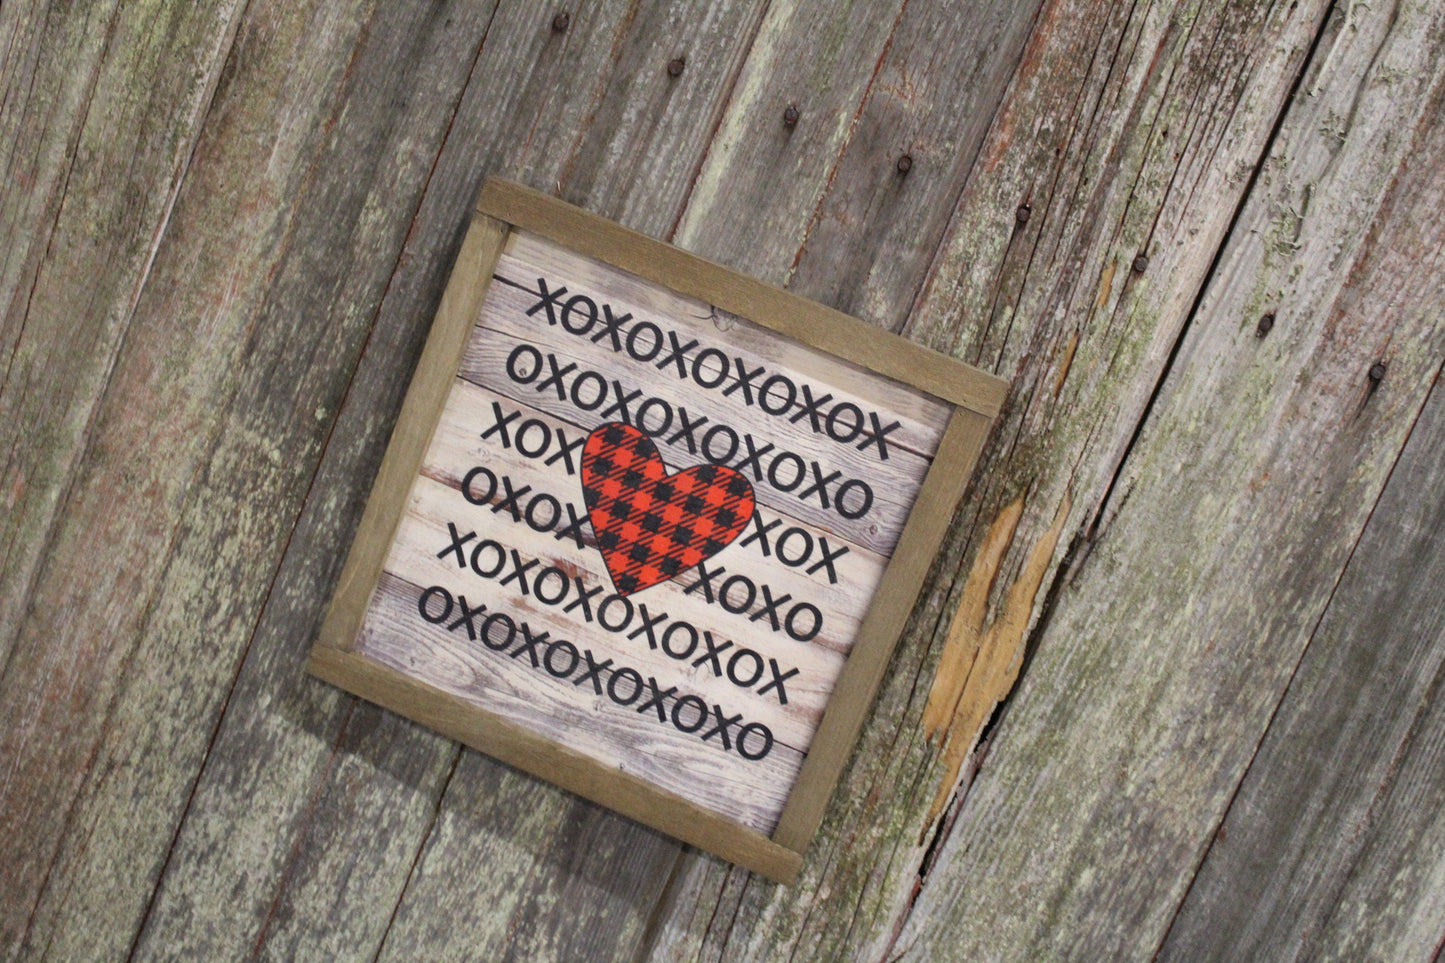 Valentines Wood Sign XOXO Text Buffalo Plaid Heart Sweetest Day Valentines Day Red Shiplap Print Art Farmhouse Primitive Rustic